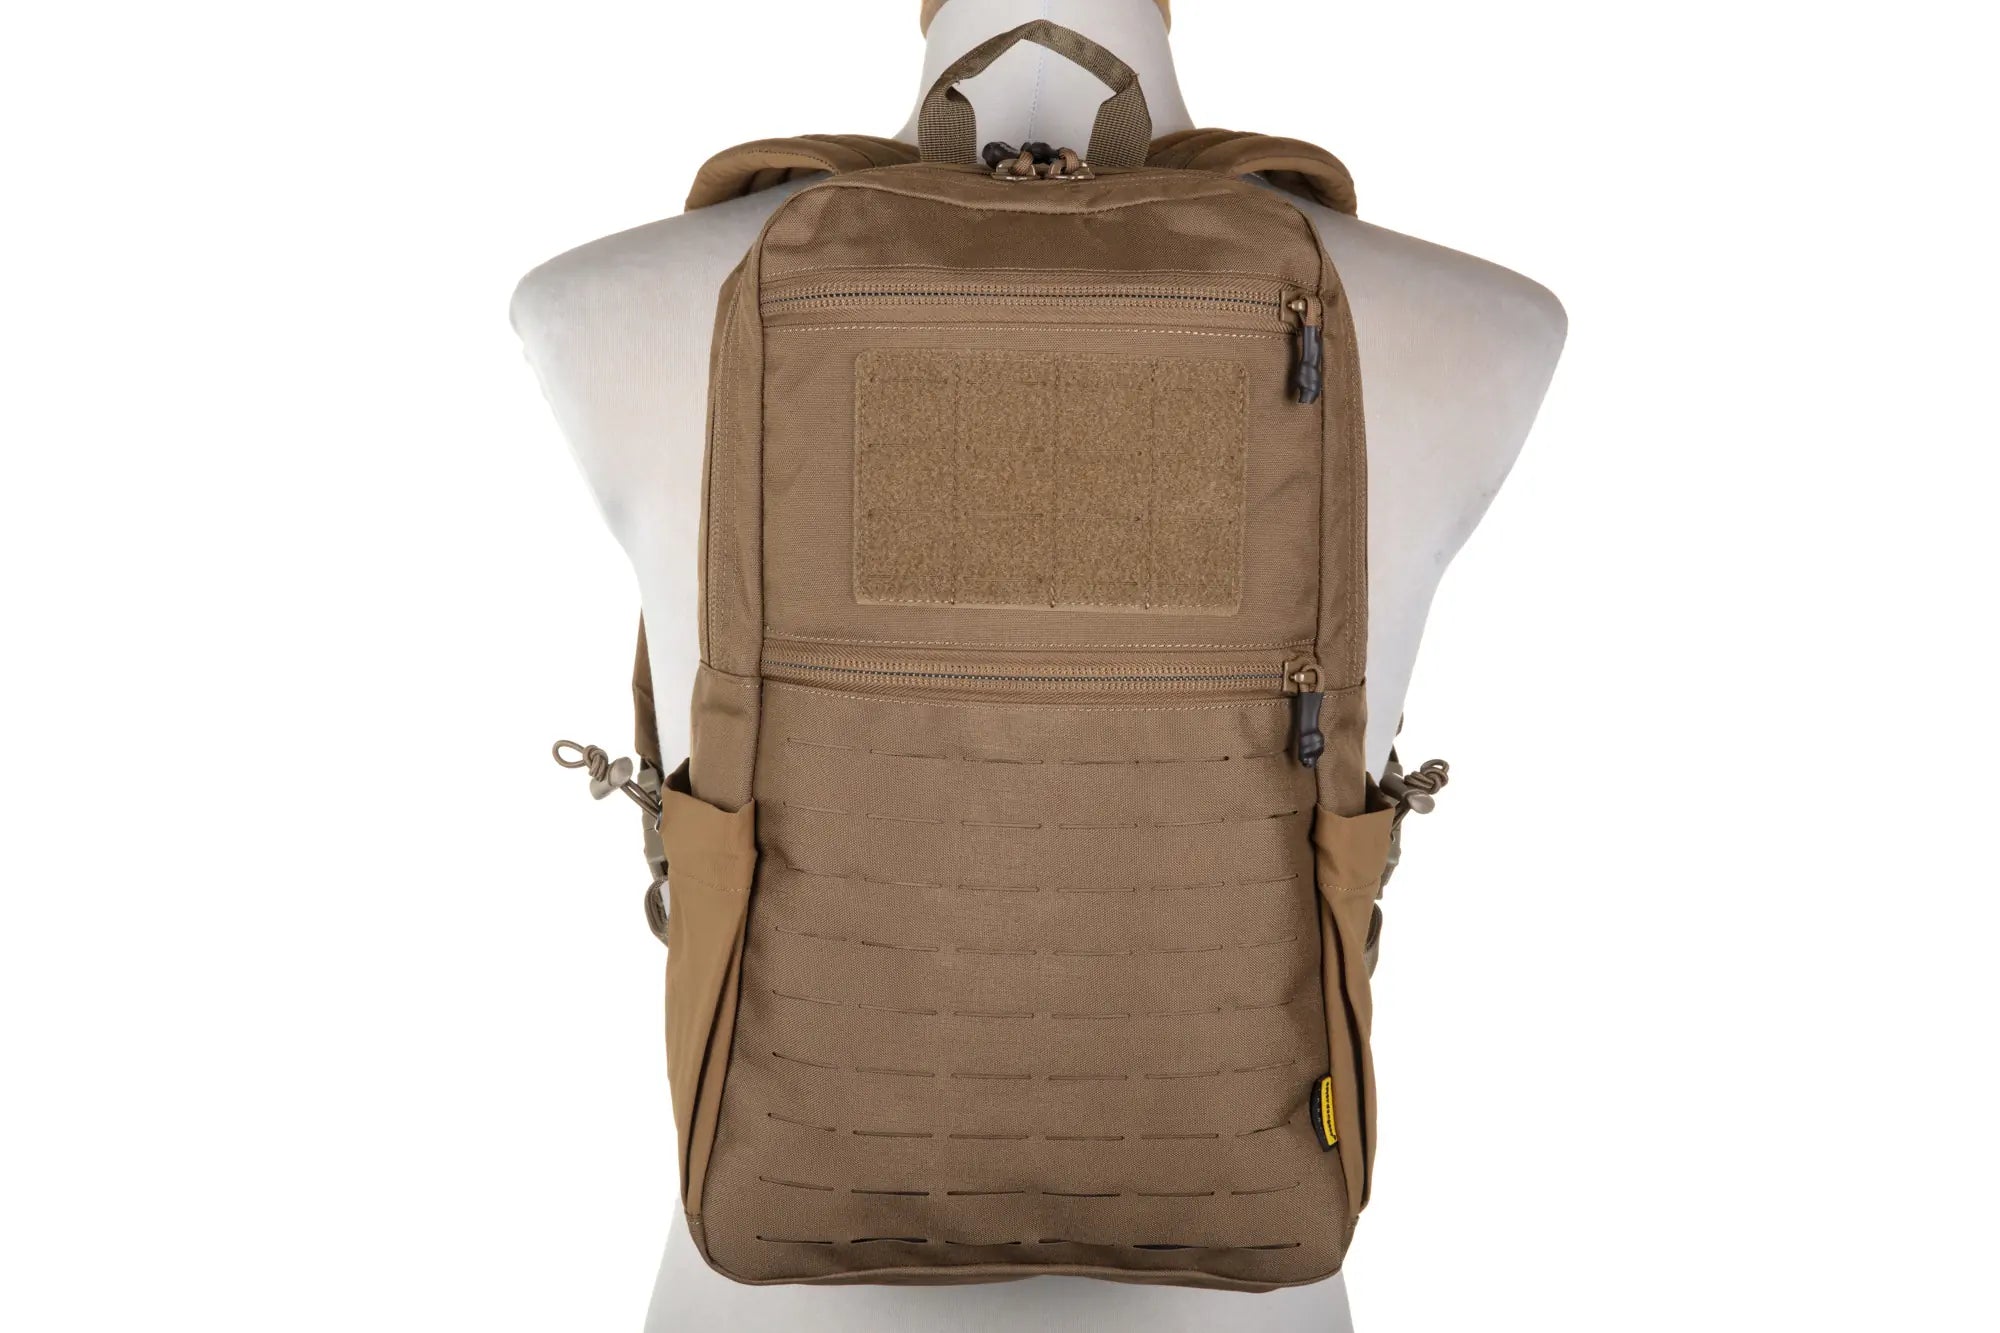 Emerson Gear Commuter 14L Backpack Coyote Brown-5